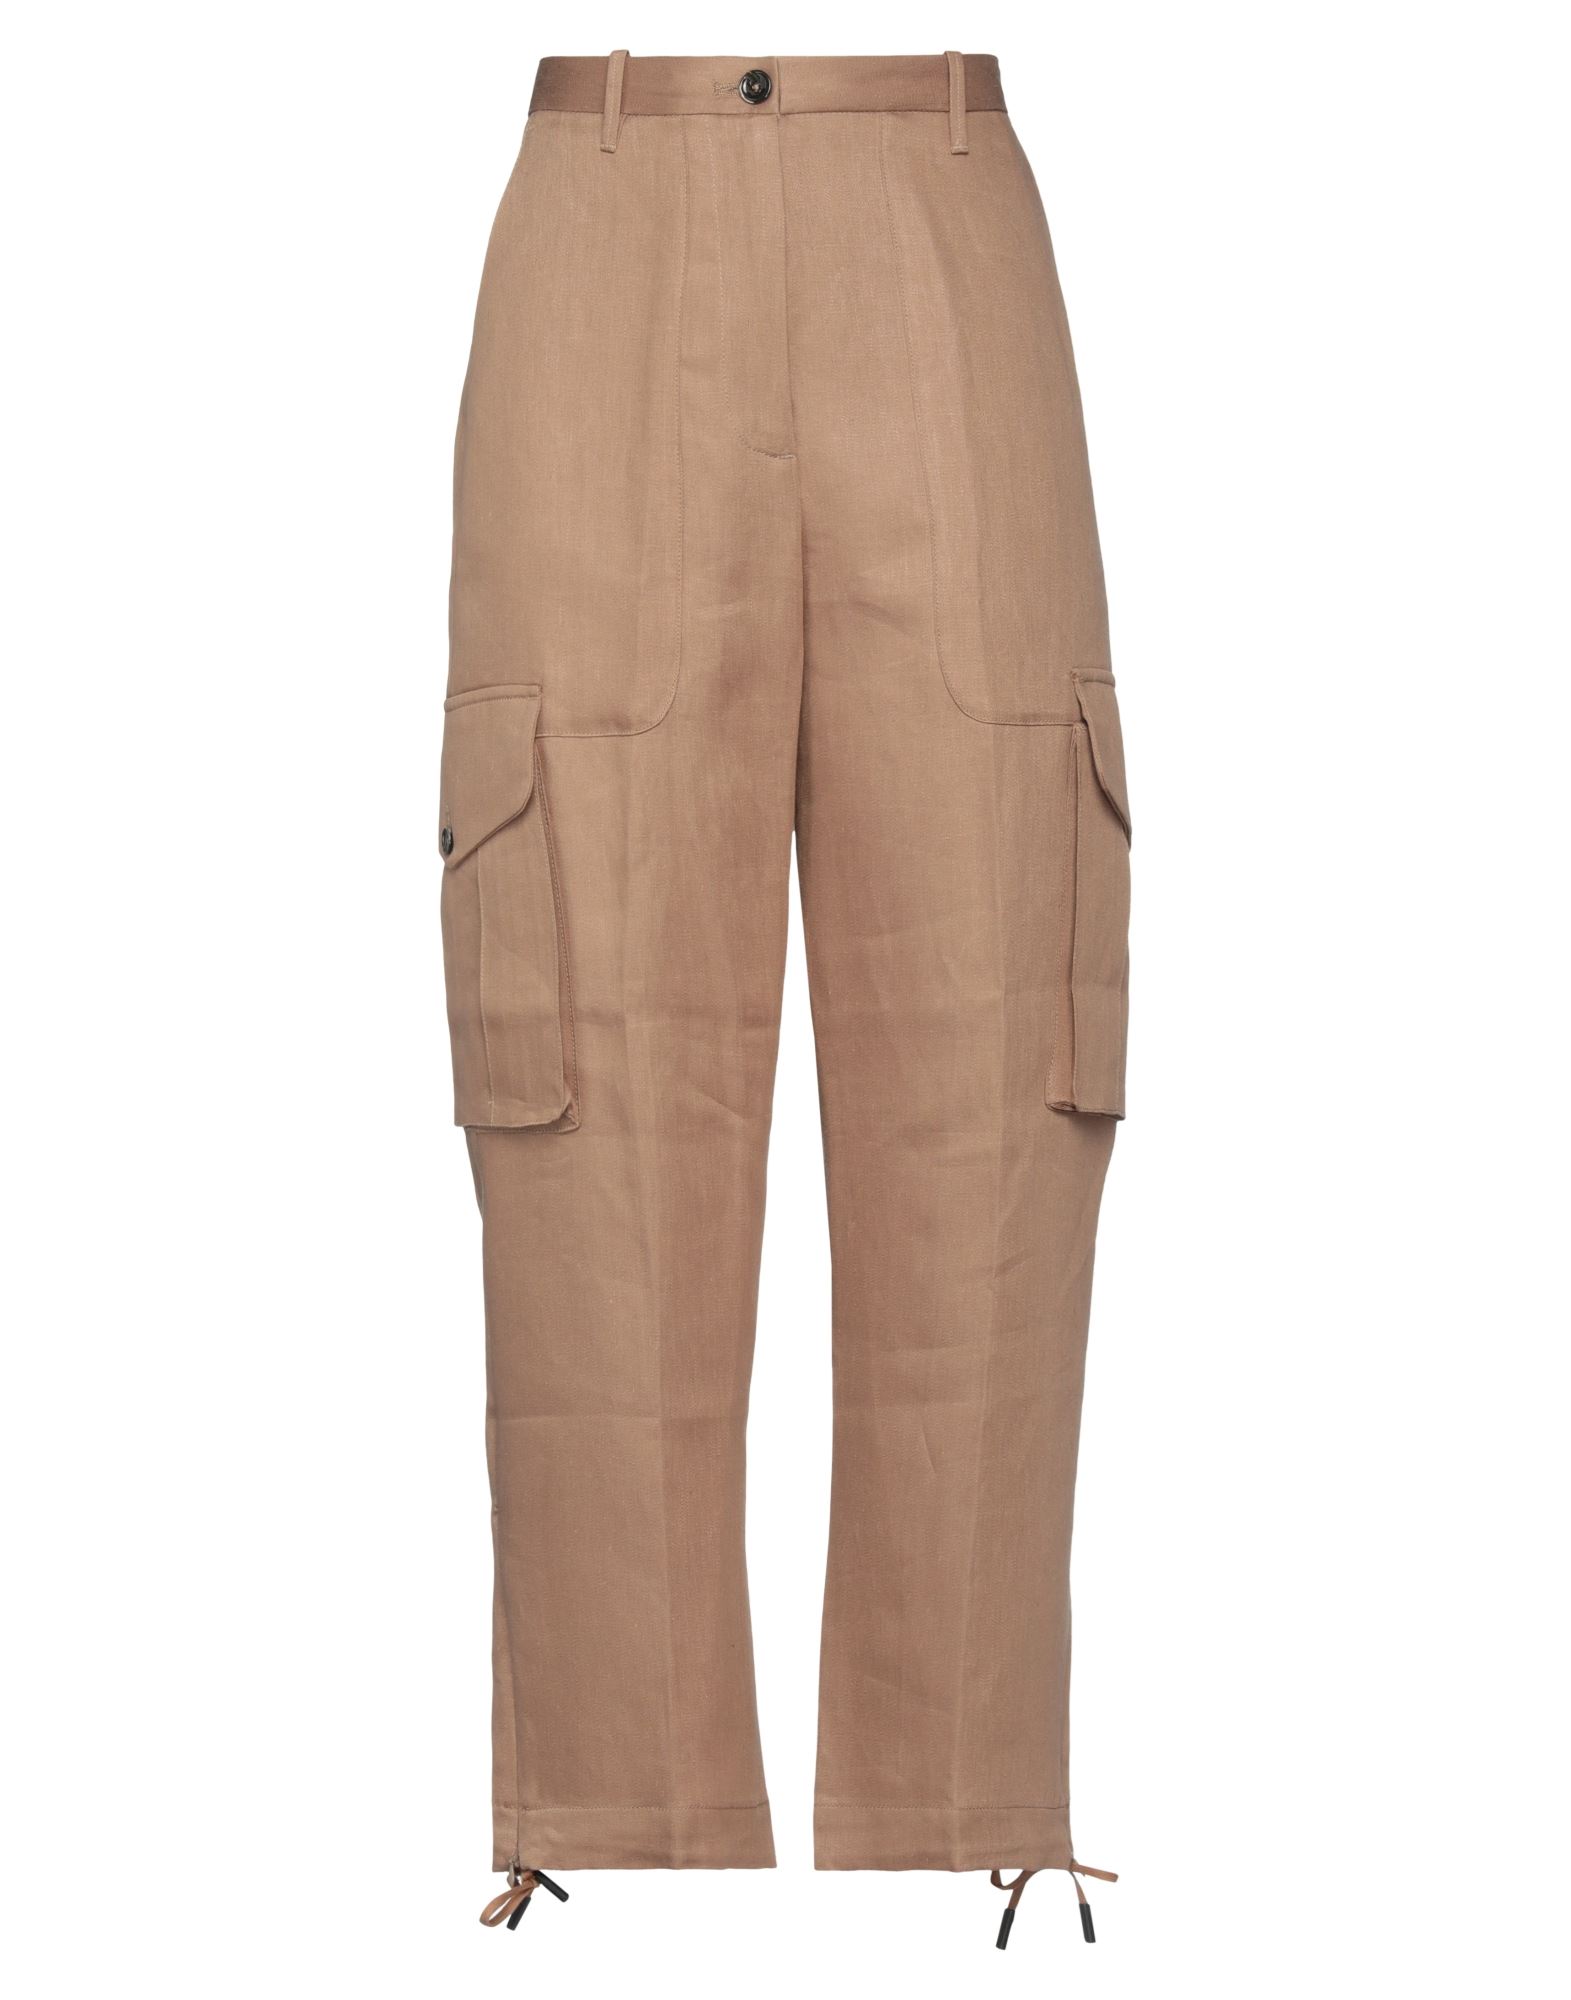 Shop Nine:inthe:morning Nine In The Morning Woman Pants Brown Size 28 Linen